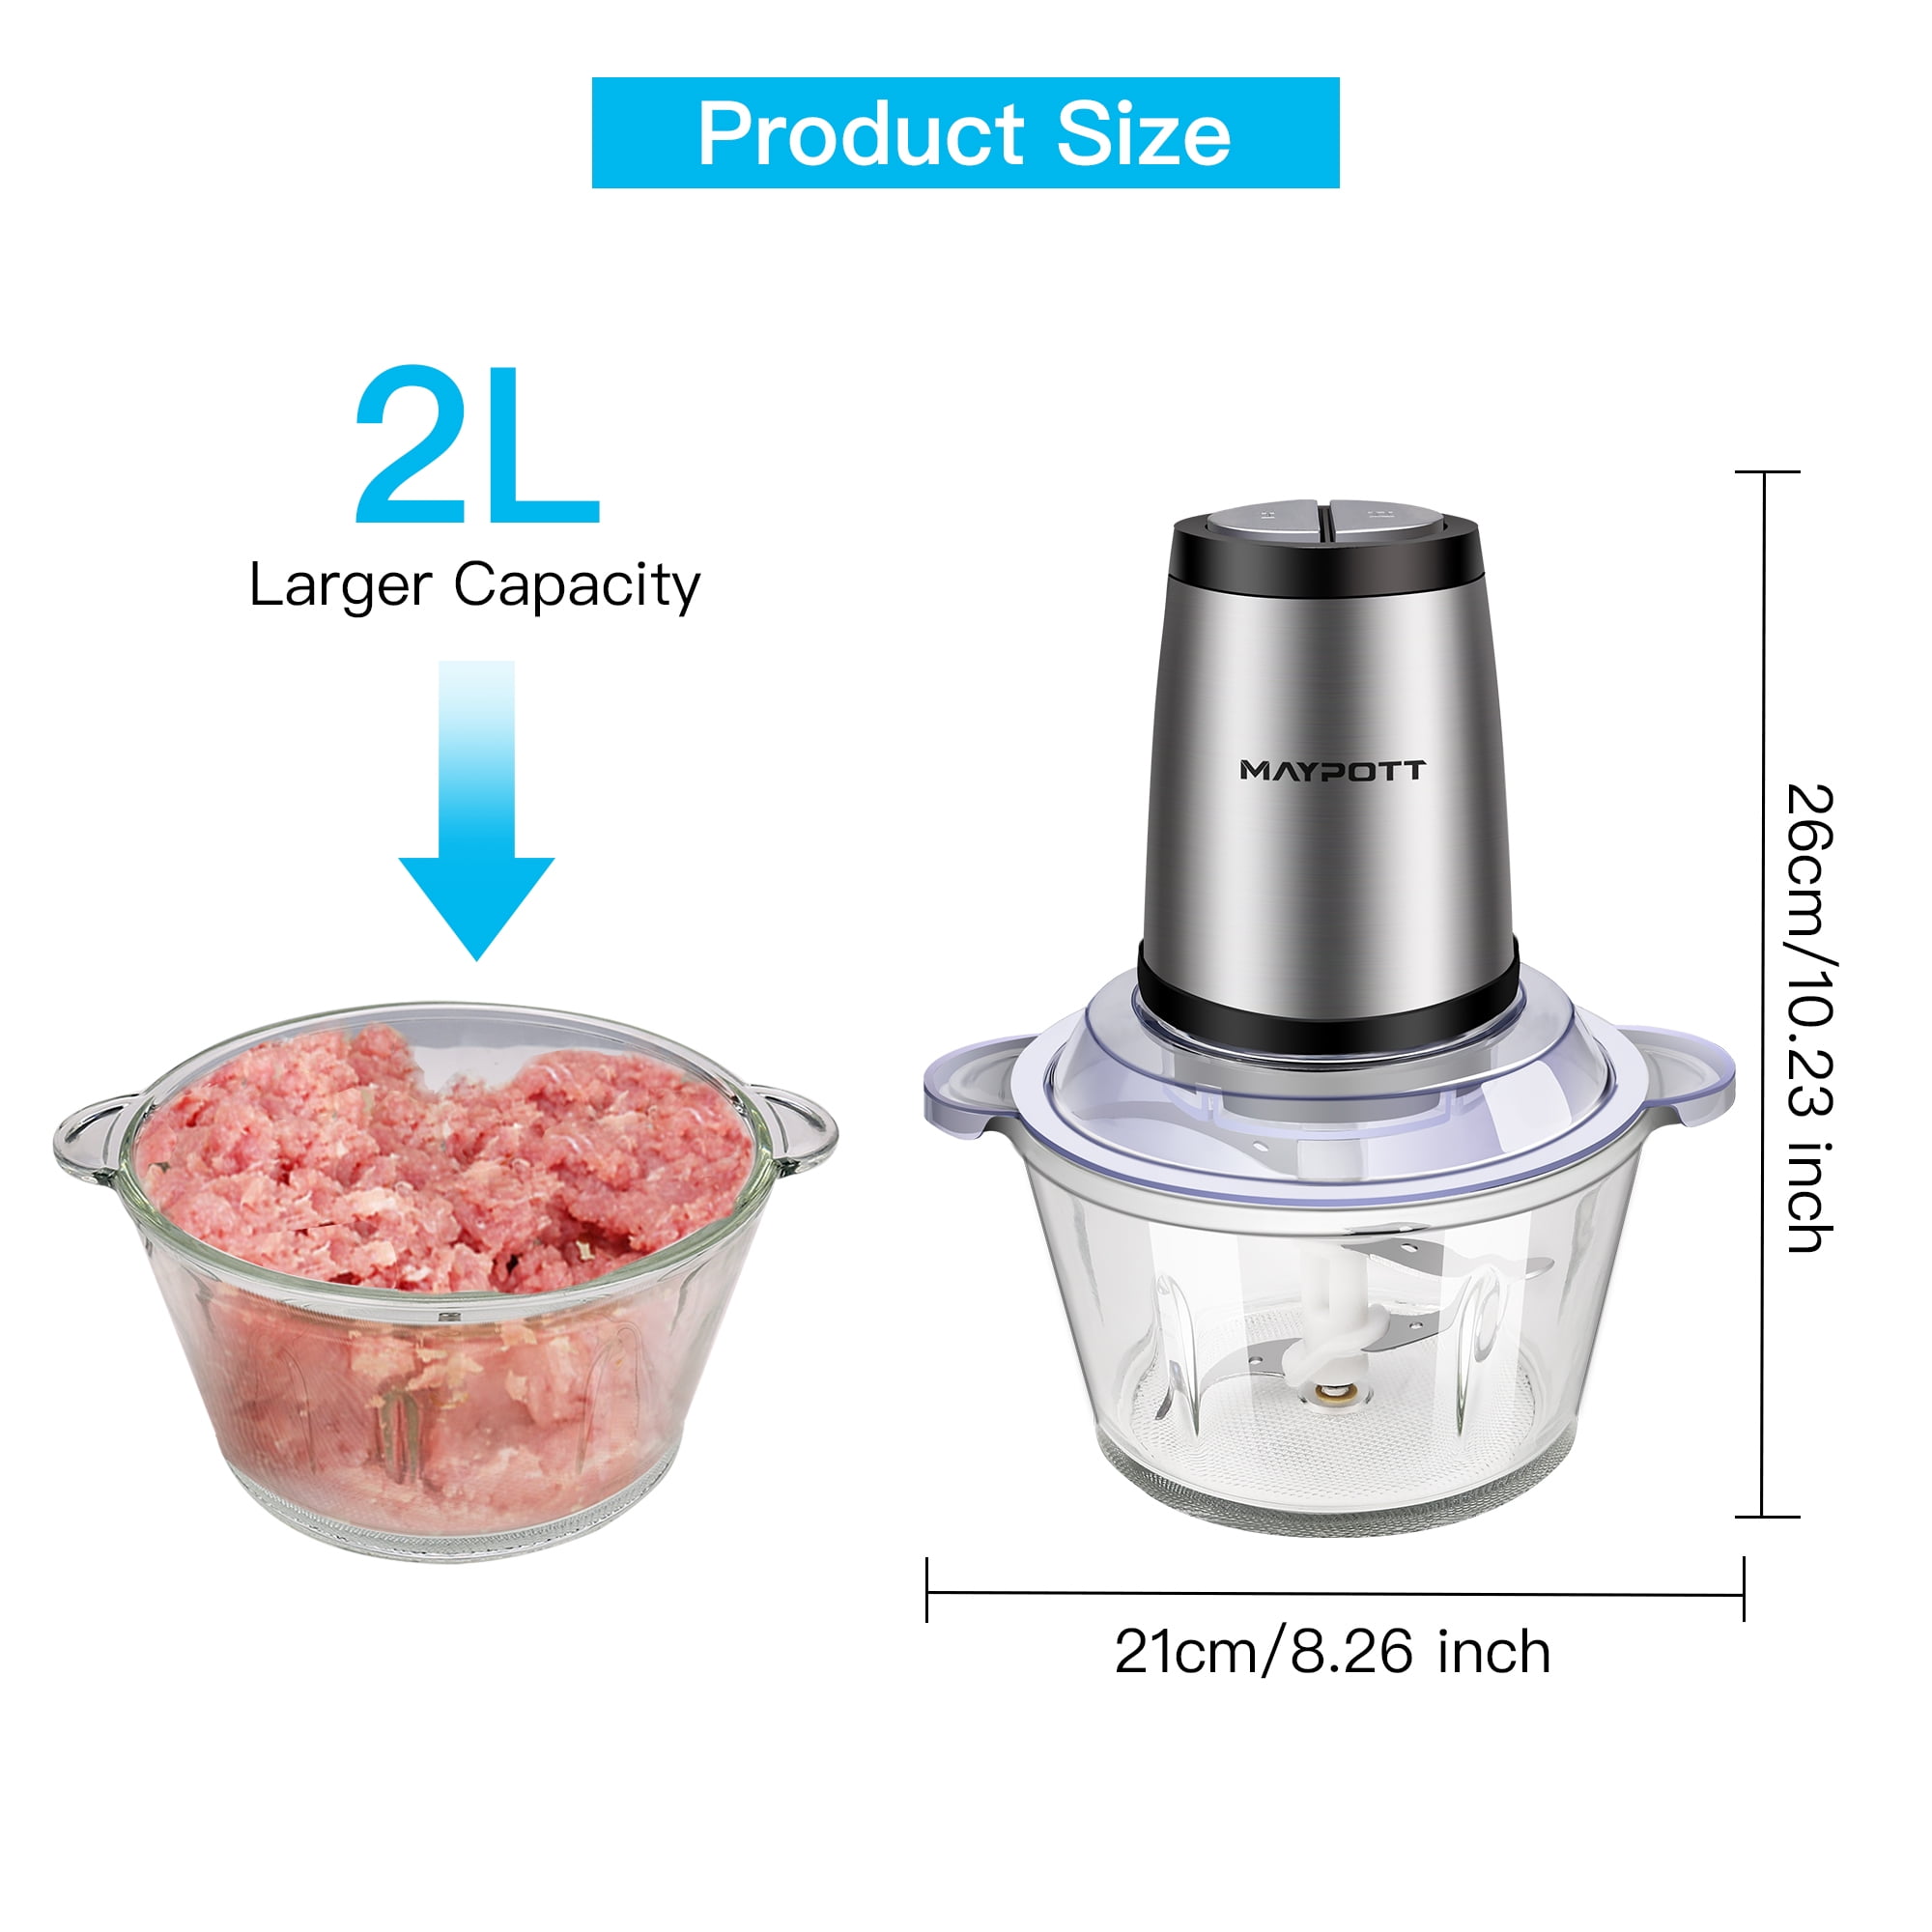  PULOYA Mini Food Processor 2 Cup Small Electric Food Chopper 2  Speed for Vegetables, Meat, Fruits and Nuts with 4 Stainless Steel Blades,  400-Watt, Red: Home & Kitchen